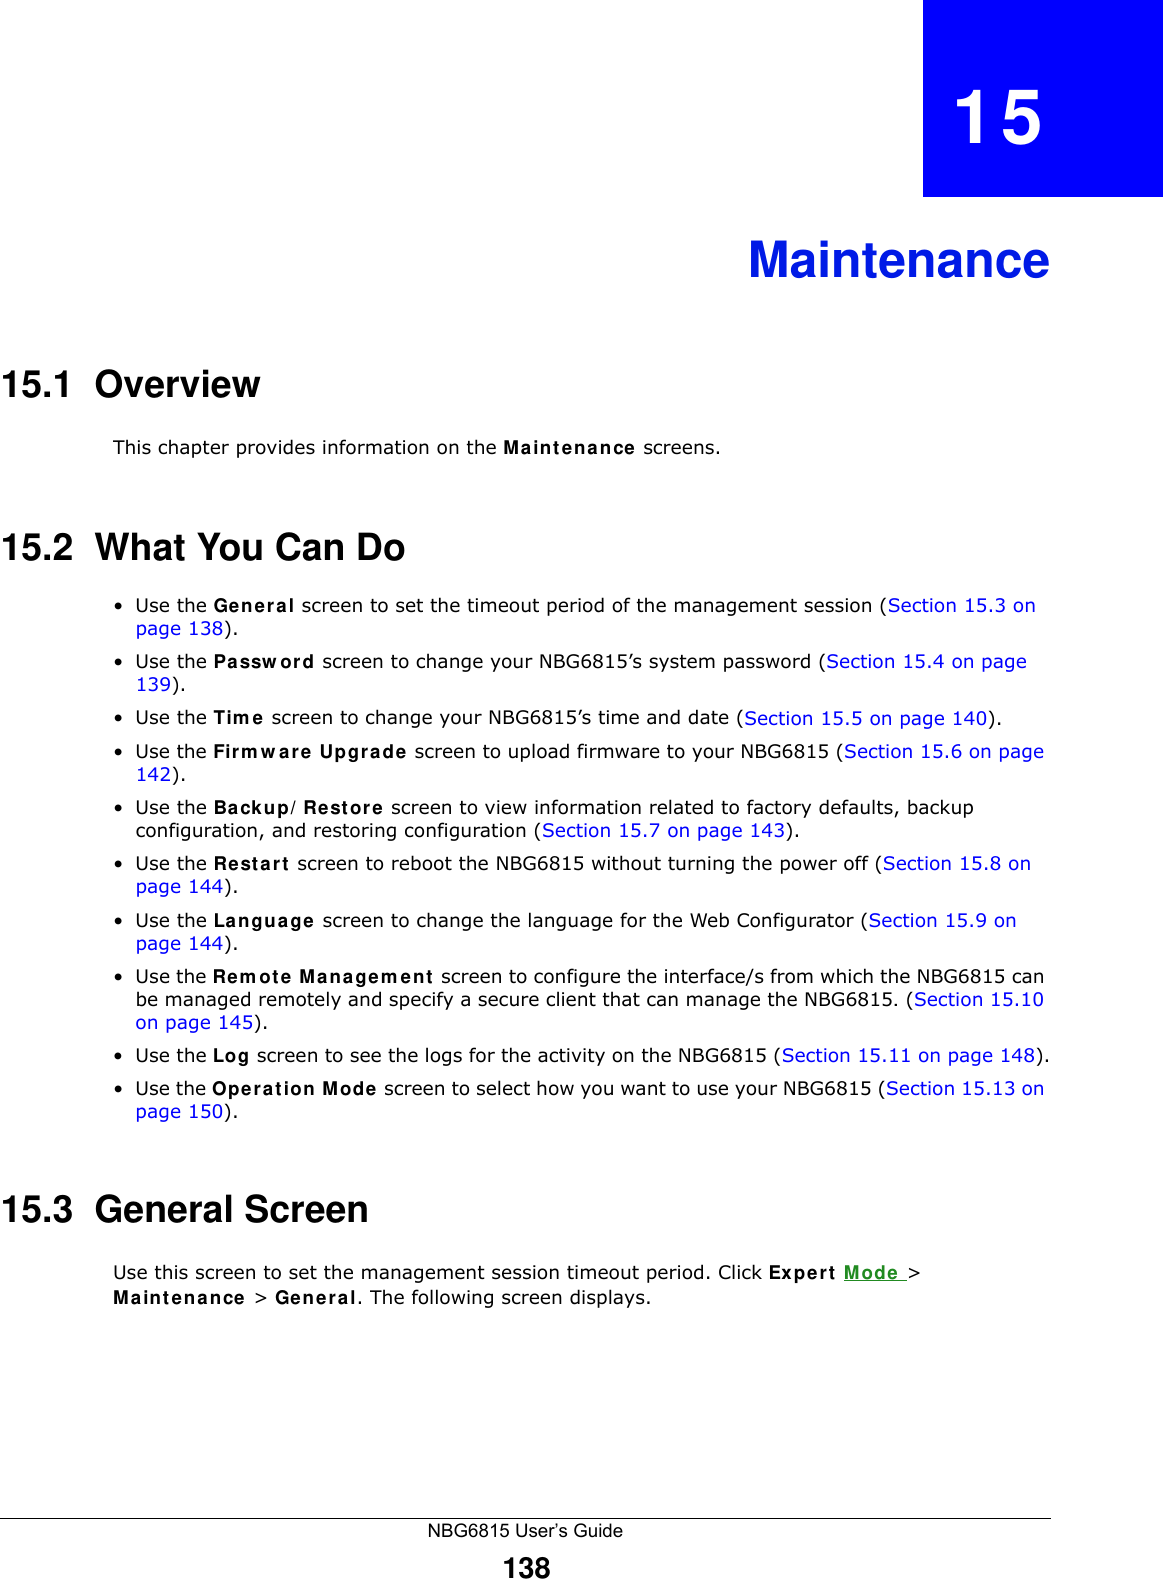 NBG6815 User’s Guide138CHAPTER   15Maintenance15.1  OverviewThis chapter provides information on the Maintenance screens. 15.2  What You Can Do•Use the General screen to set the timeout period of the management session (Section 15.3 on page 138). •Use the Password screen to change your NBG6815’s system password (Section 15.4 on page 139).•Use the Time screen to change your NBG6815’s time and date (Section 15.5 on page 140).•Use the Firmware Upgrade screen to upload firmware to your NBG6815 (Section 15.6 on page 142).•Use the Backup/Restore screen to view information related to factory defaults, backup configuration, and restoring configuration (Section 15.7 on page 143).•Use the Restart screen to reboot the NBG6815 without turning the power off (Section 15.8 on page 144).•Use the Language screen to change the language for the Web Configurator (Section 15.9 on page 144).•Use the Remote Management screen to configure the interface/s from which the NBG6815 can be managed remotely and specify a secure client that can manage the NBG6815. (Section 15.10 on page 145).•Use the Log screen to see the logs for the activity on the NBG6815 (Section 15.11 on page 148).•Use the Operation Mode screen to select how you want to use your NBG6815 (Section 15.13 on page 150). 15.3  General Screen Use this screen to set the management session timeout period. Click Expert Mode &gt; Maintenance &gt; General. The following screen displays.